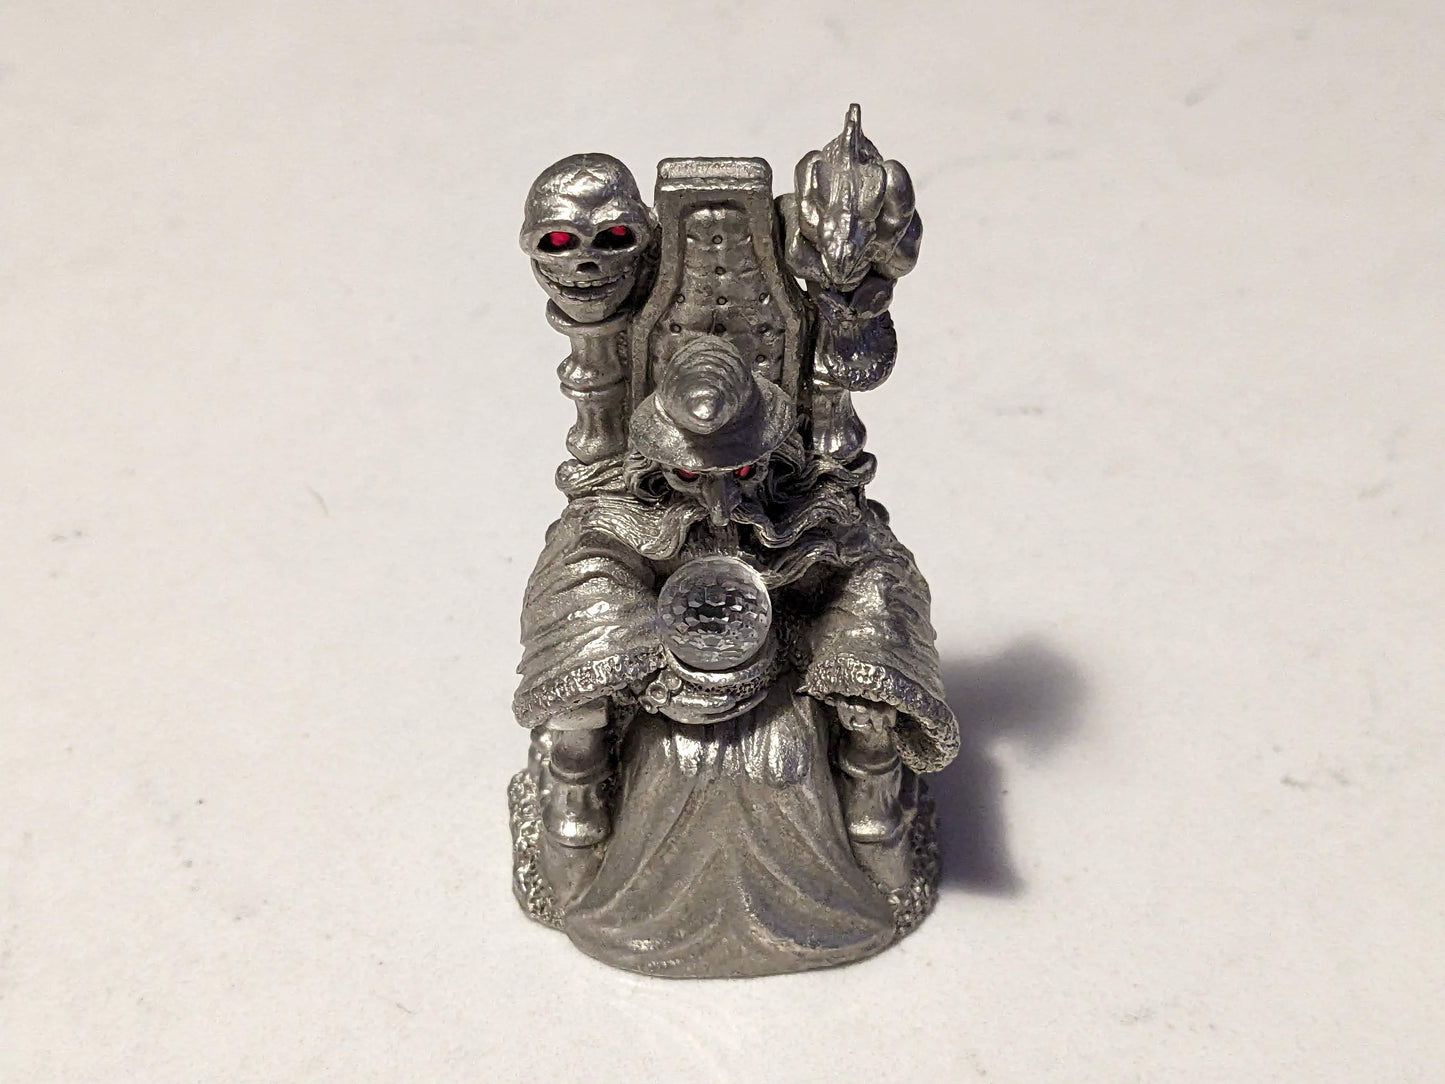 Red Eye Wizard with Crystal Ball, Dragon & Skull (Vintage Spoontiques Pewter Figurine MR965)